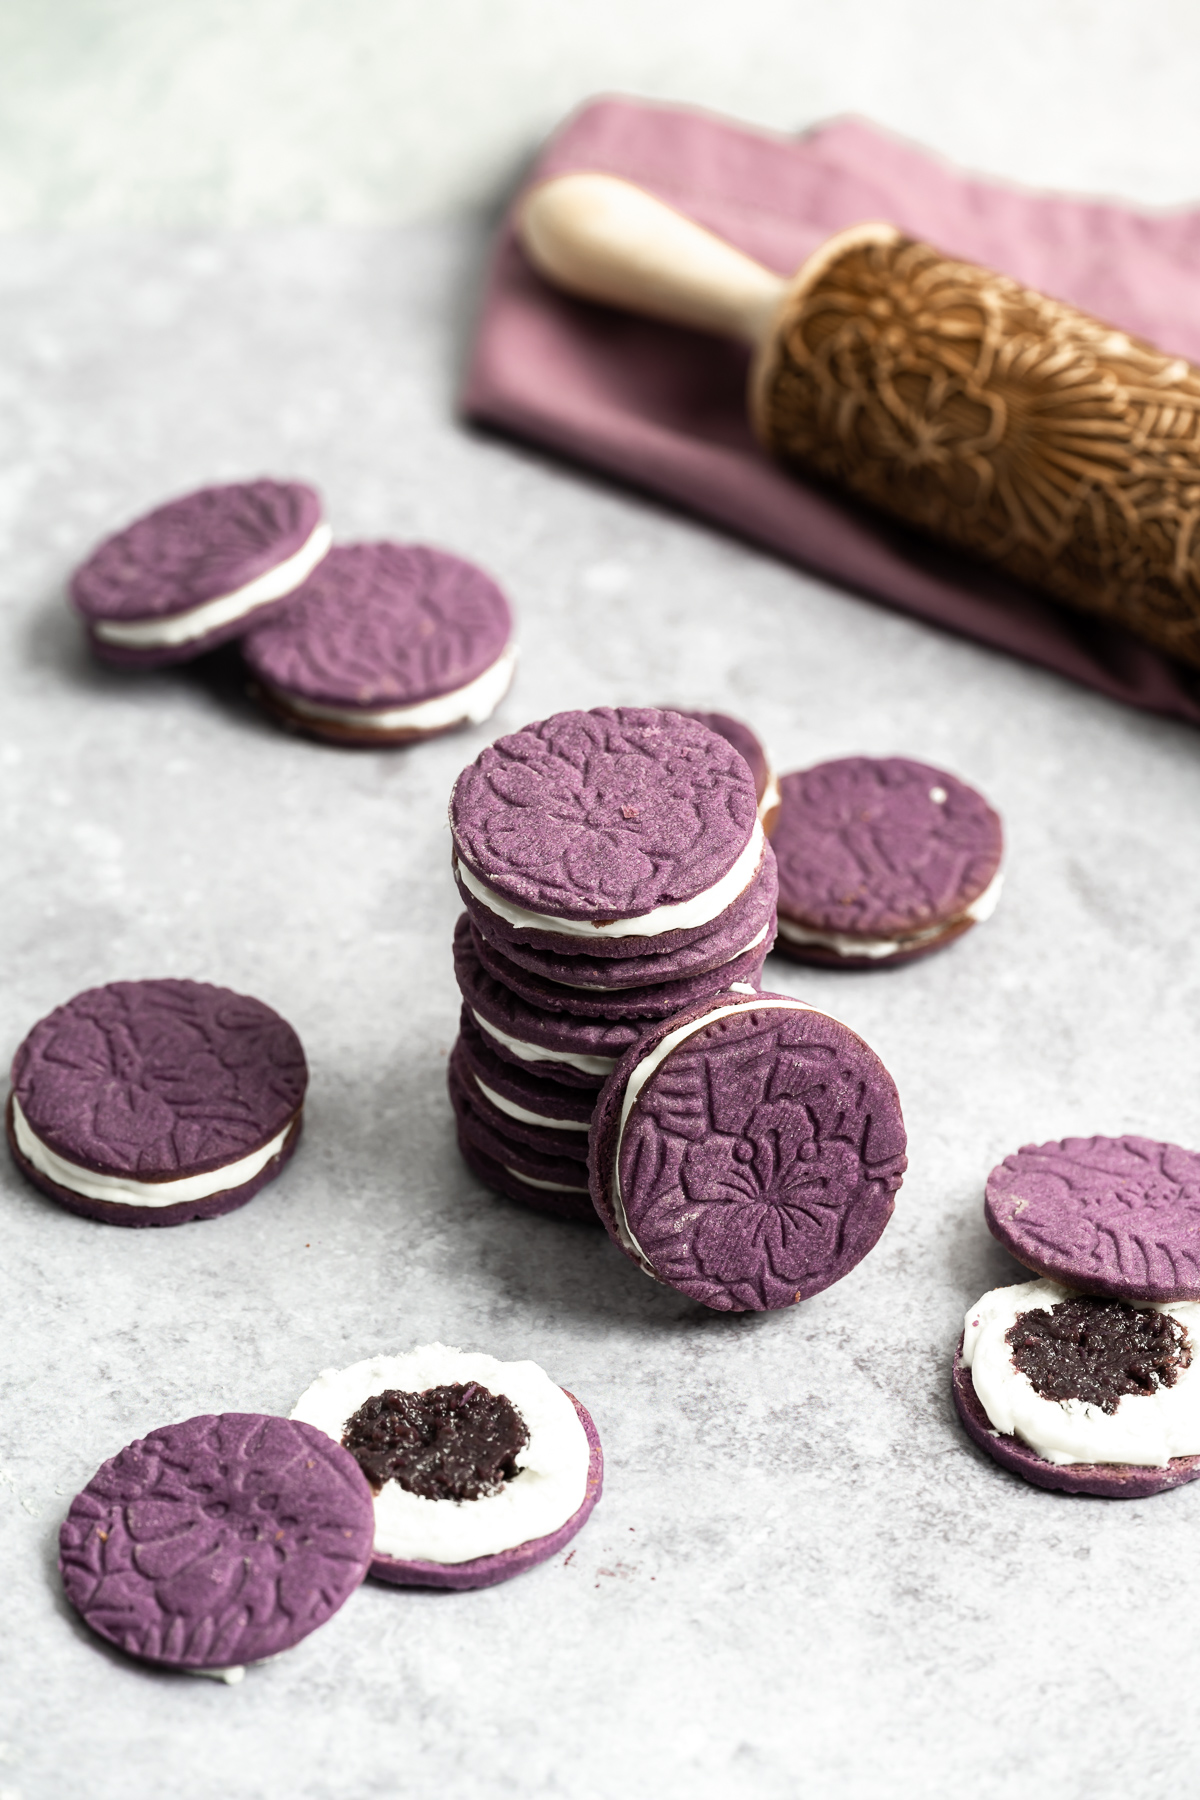 stack of embossed purple ube cookies with coconut frosting filling and ube halaya jam